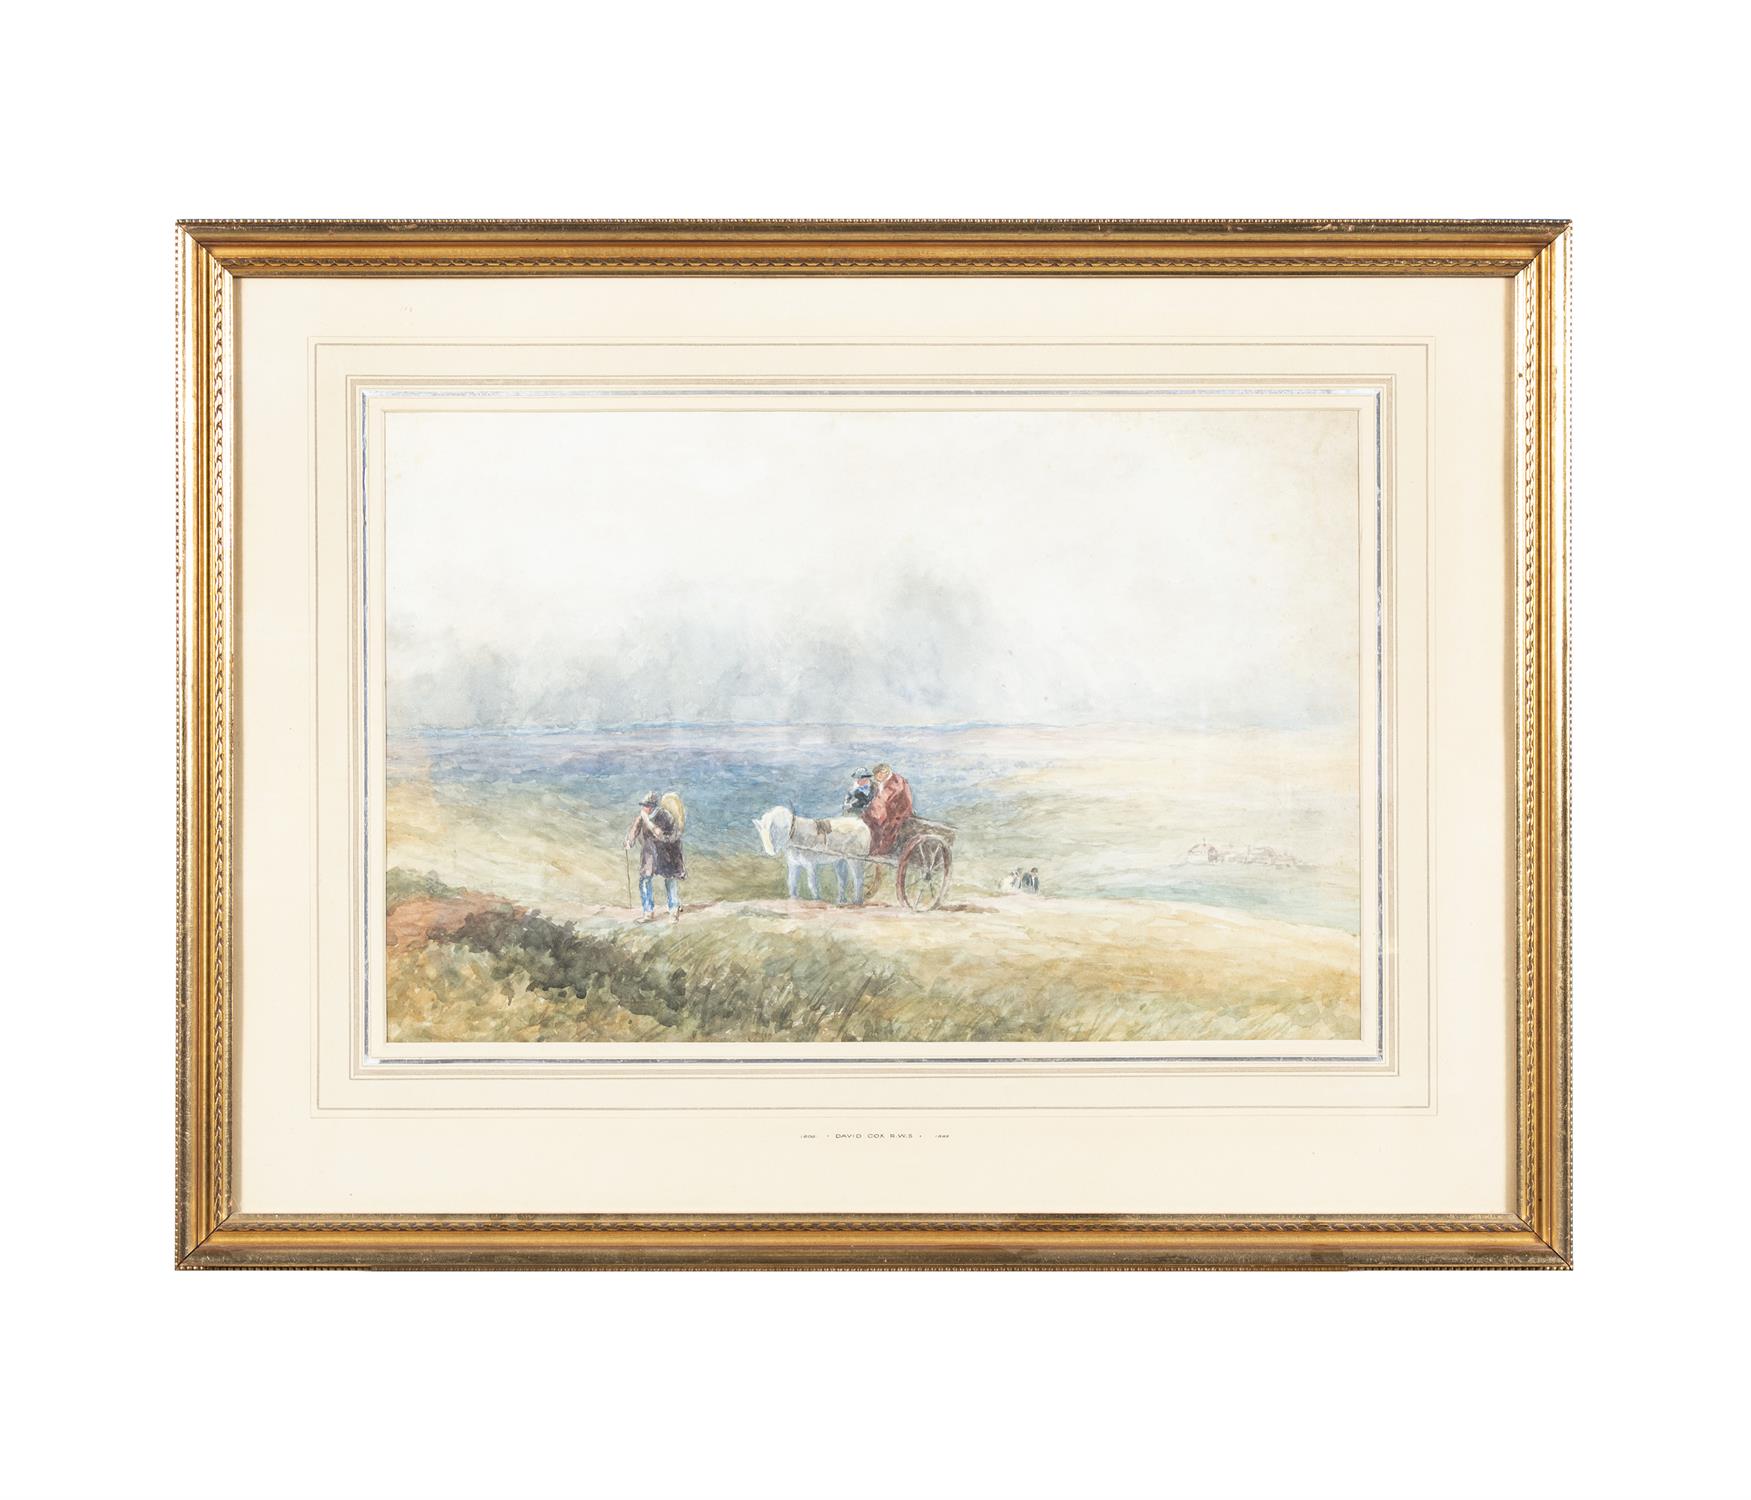 ATTRIBUTED TO DAVID COX, Figures and horse and cart ascending a mountain, with town in the